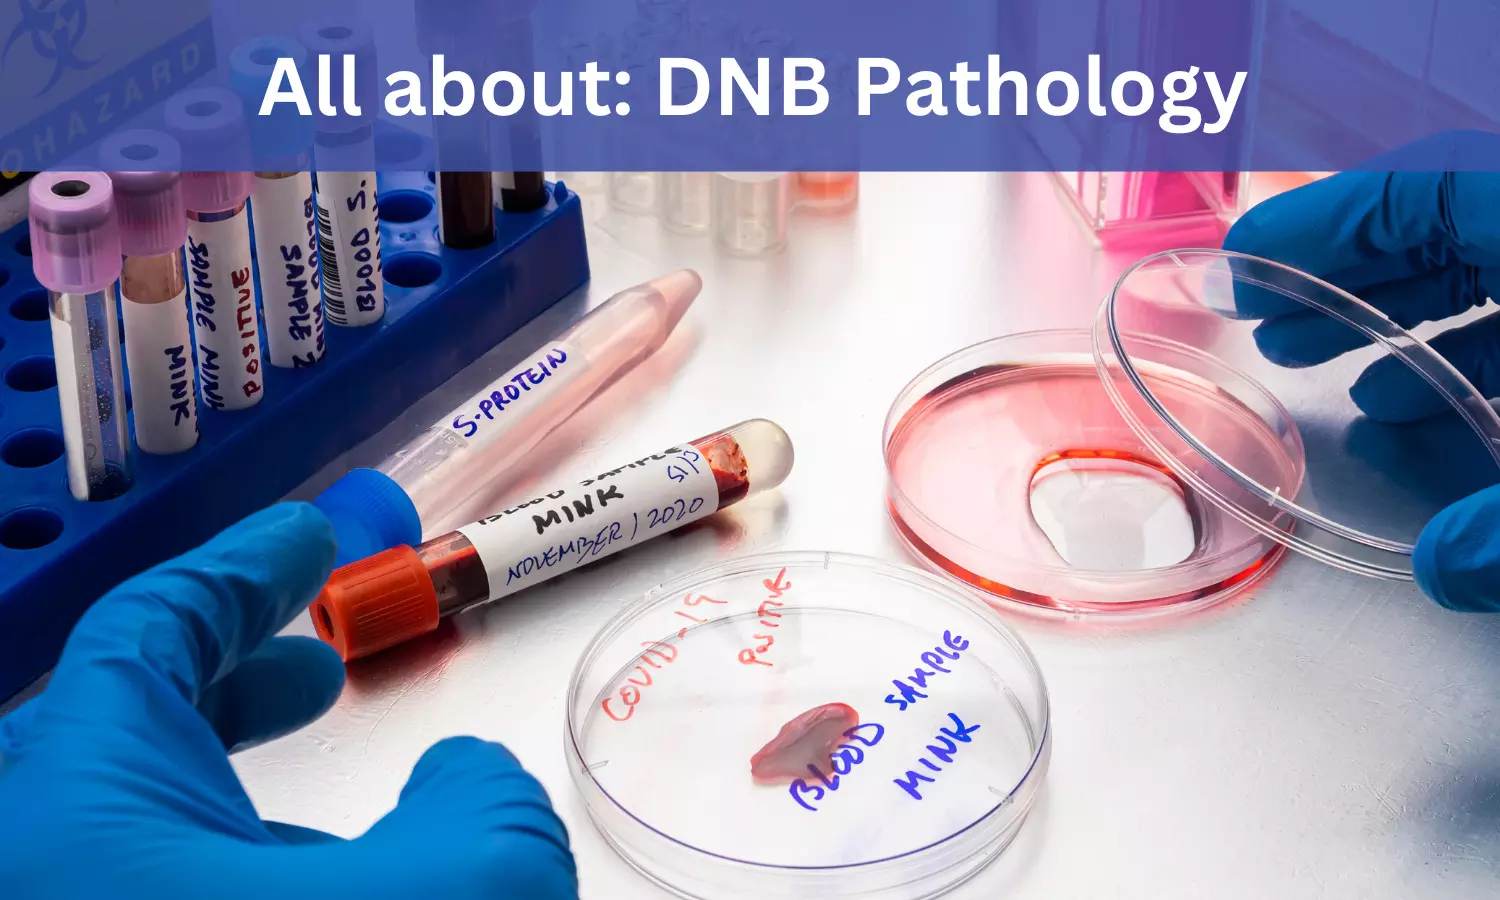 DNB Pathology: Admissions, Medical Colleges, Fee, Eligibility criteria details here